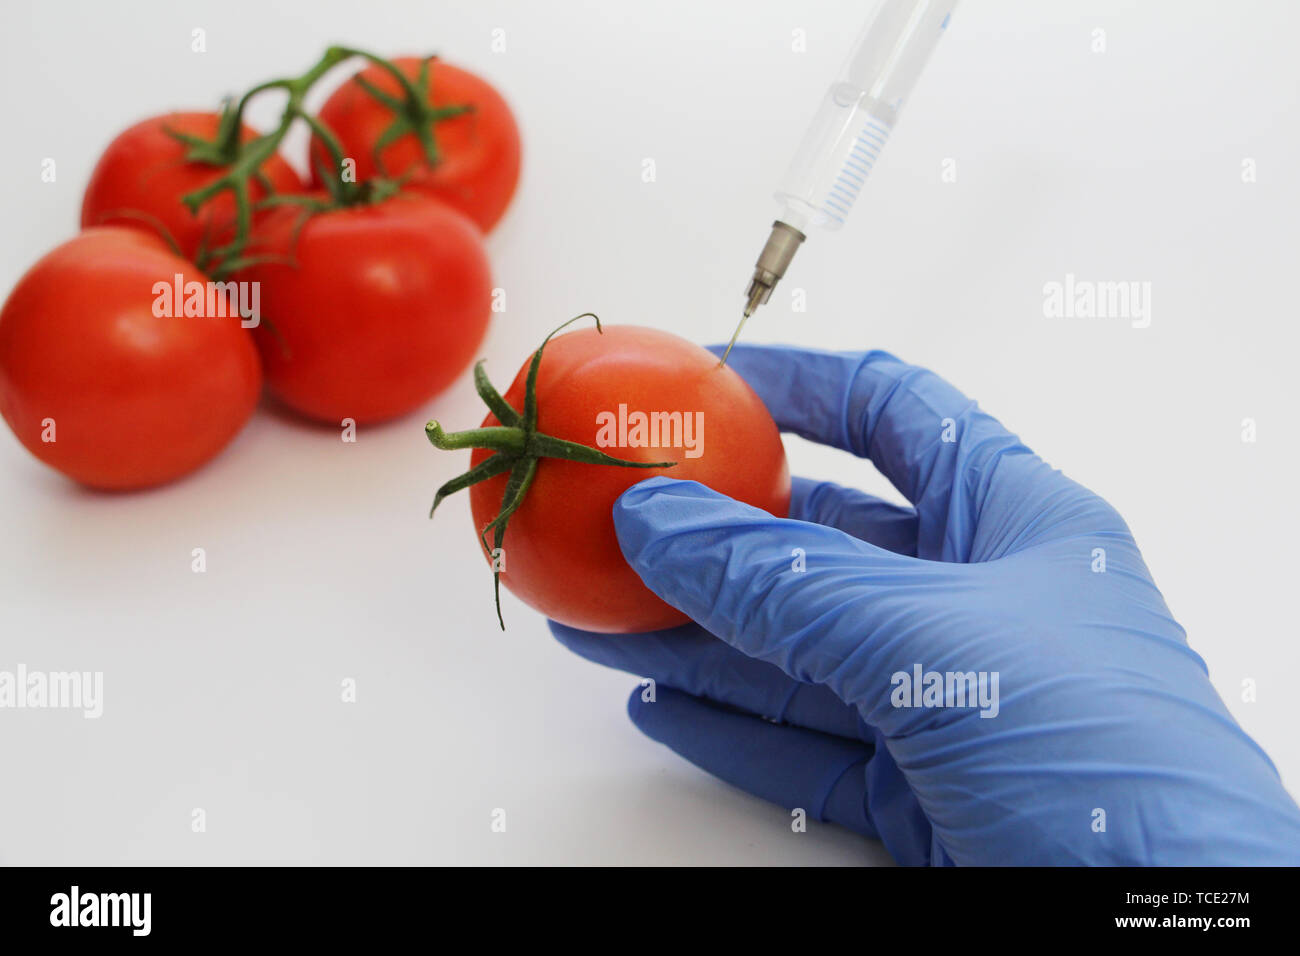 Syringe and tomatoes. The GMO Specialist injects liquid from a syringe into a red tomato. Genetically modified nutritional concept. Stock Photo